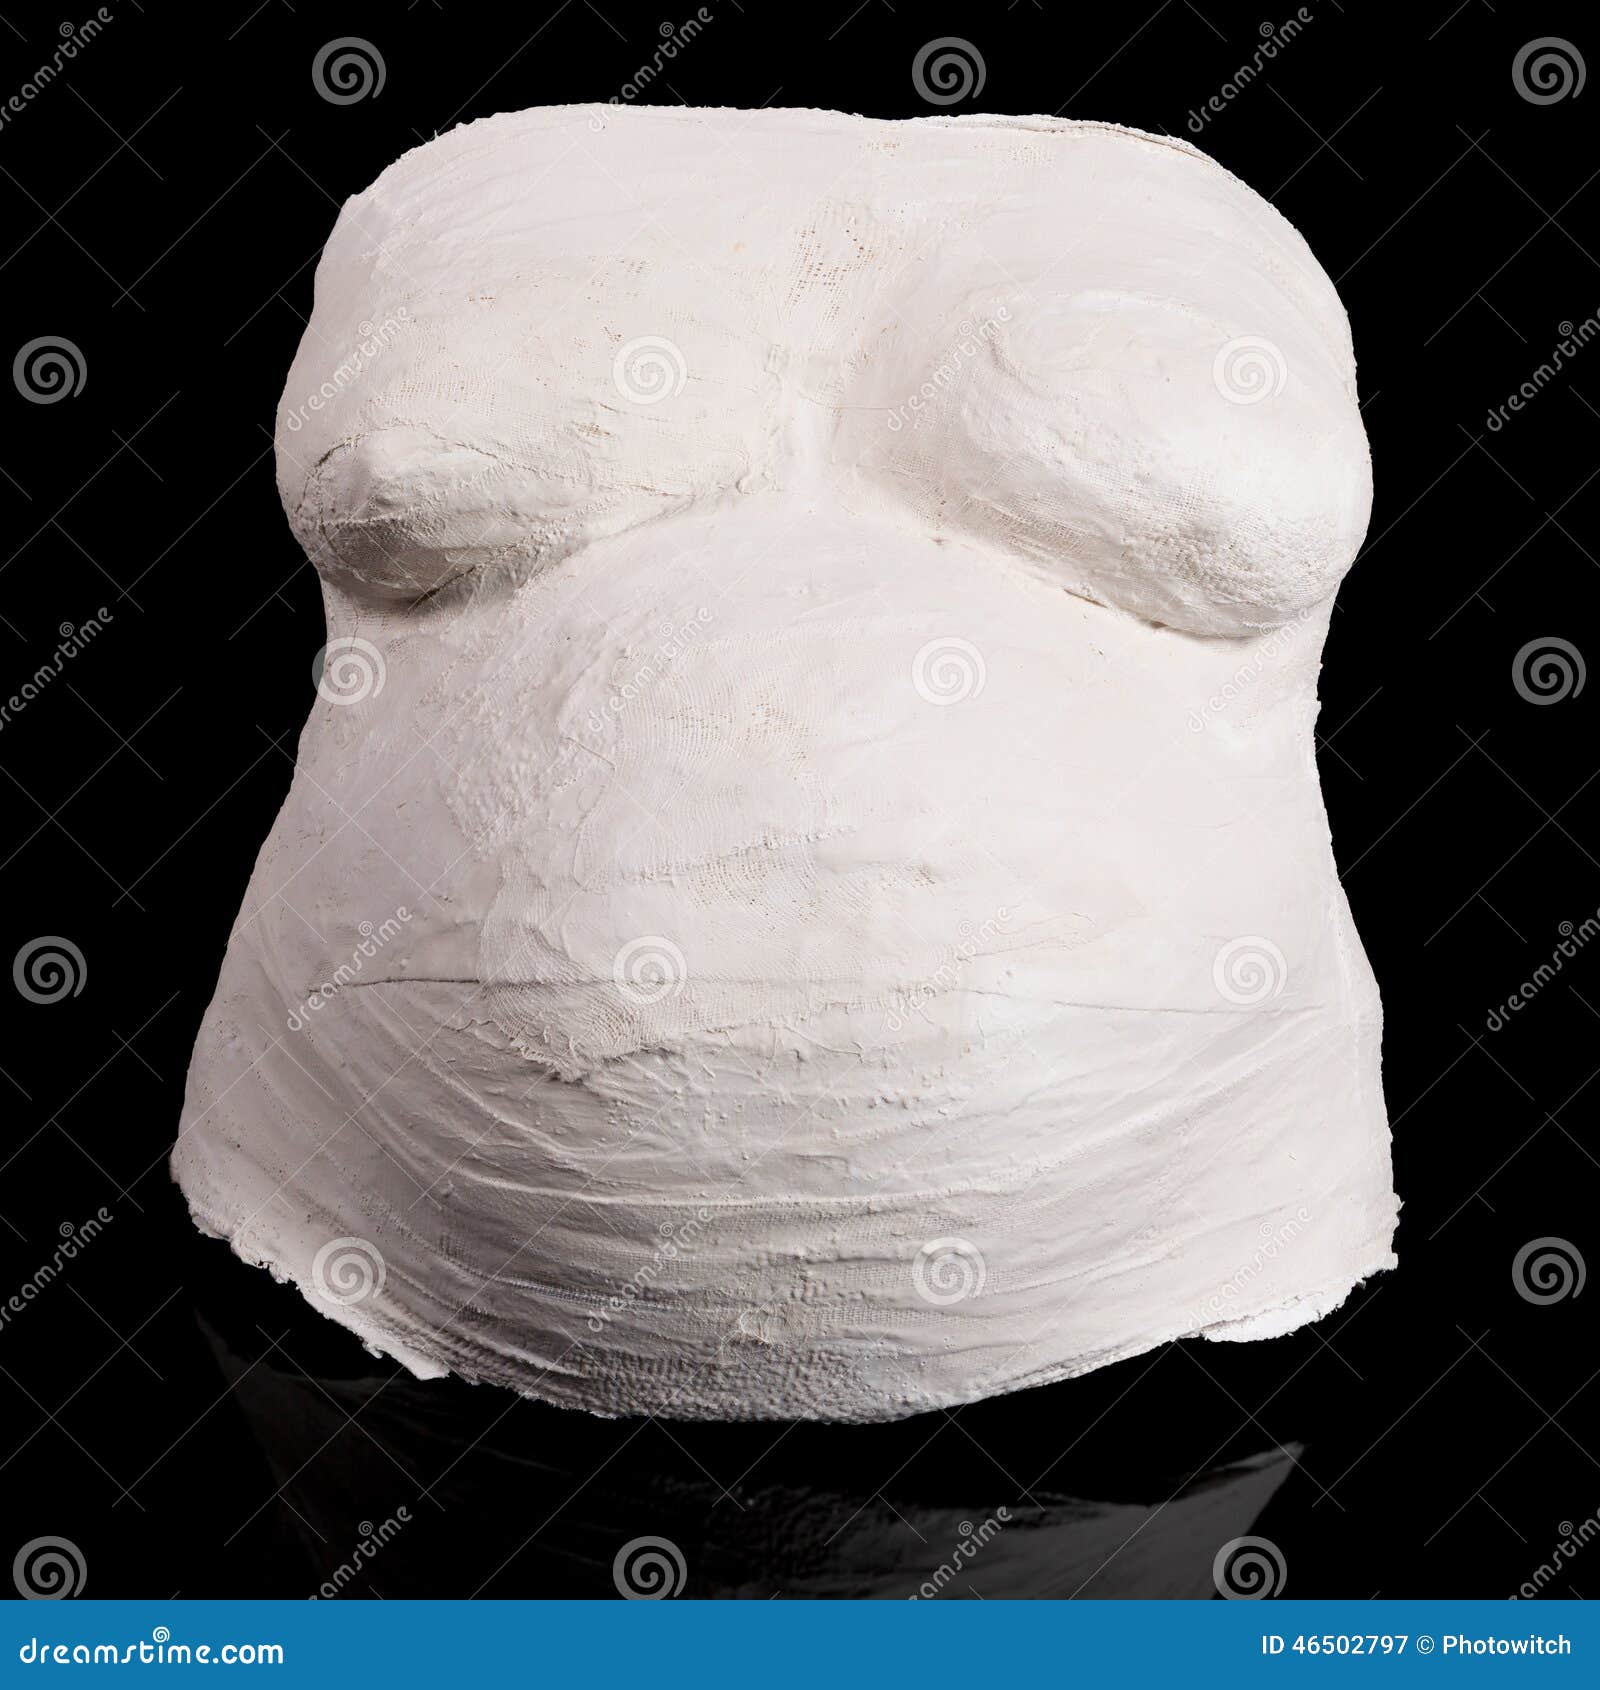 Front view belly cast stock image. Image of cast, bellies - 46502797